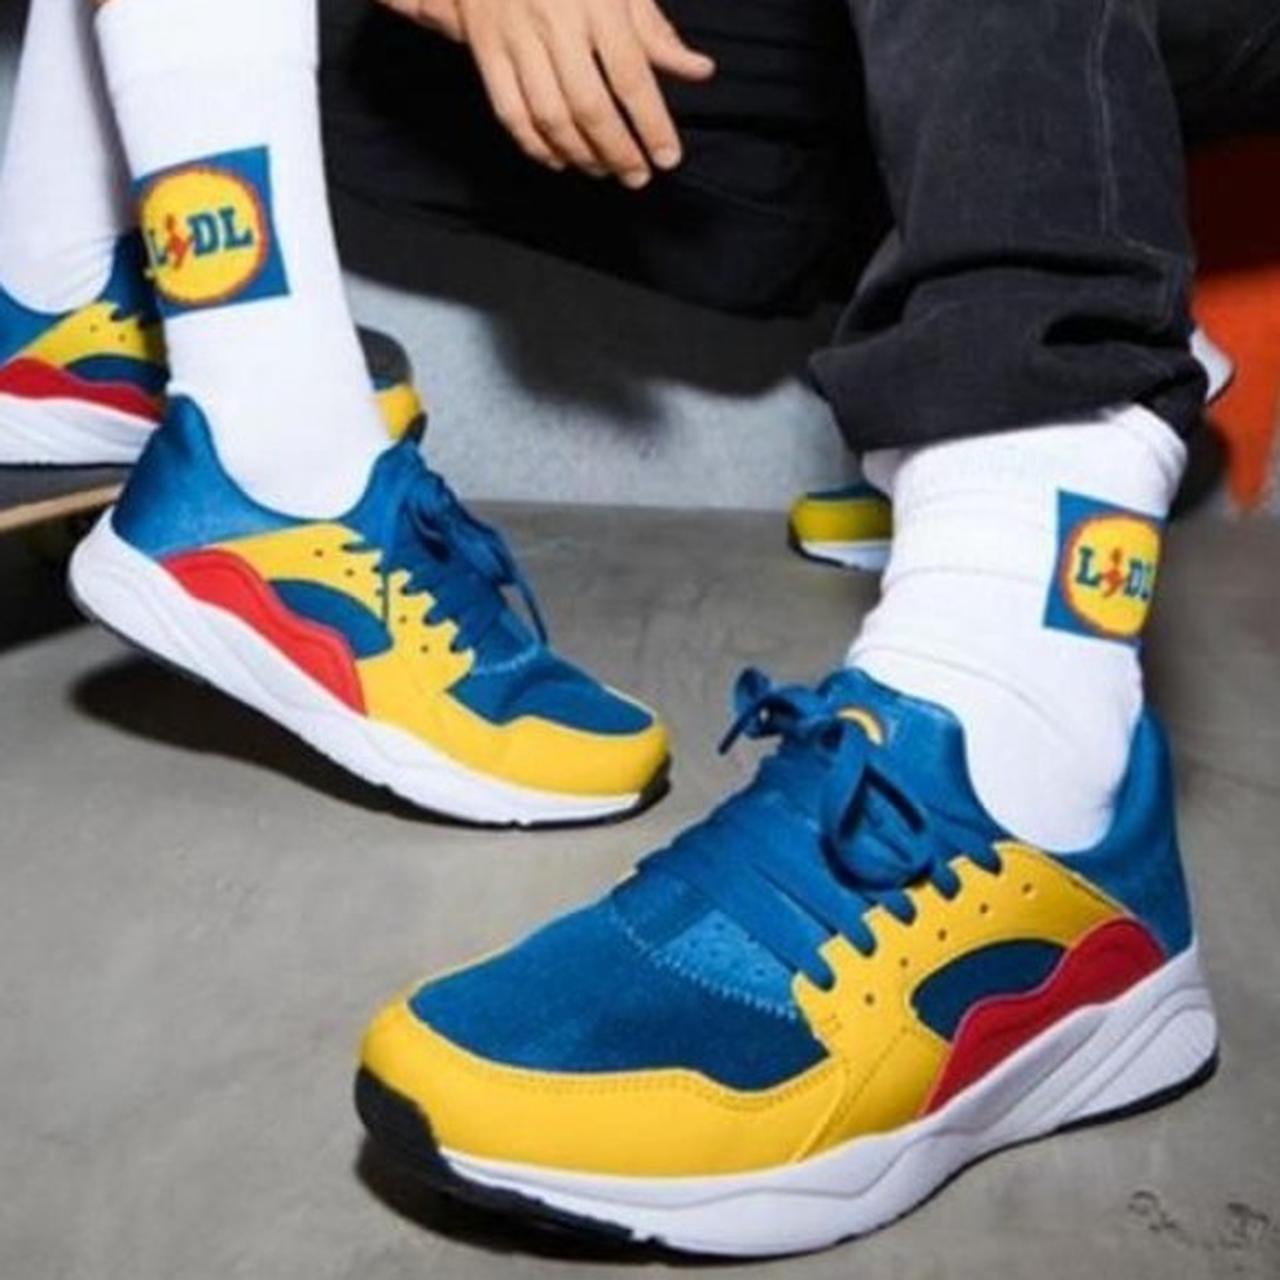 Lidl Trainers & Socks - EU44 / UK10 / US11 🔶🔷SOLD OUT Limited Lidl  Sneakers | eBay